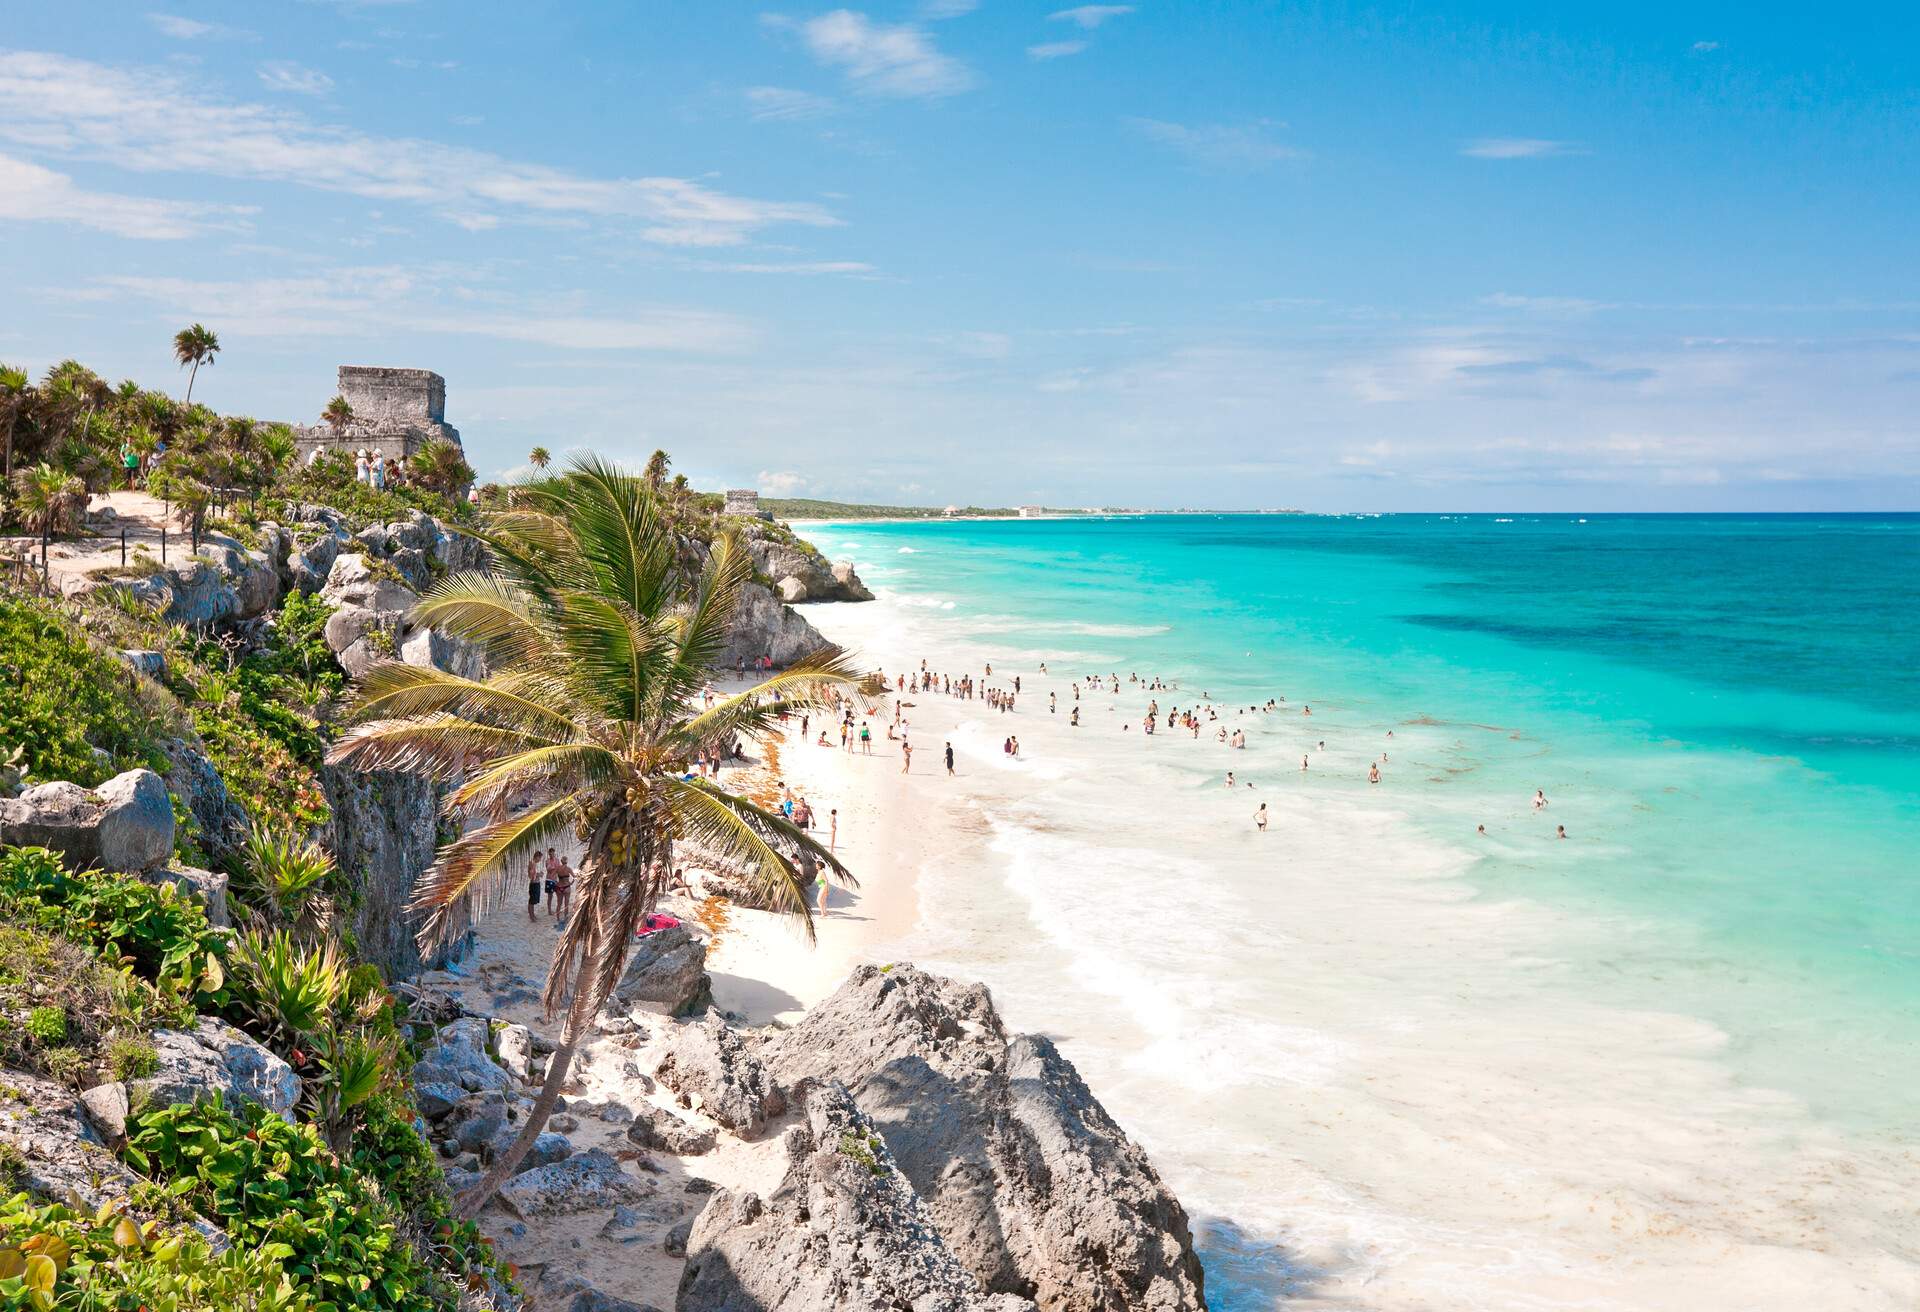 DEST_MEXICO_TULUM_BEACH_PEOPLE_GettyImages-147331828